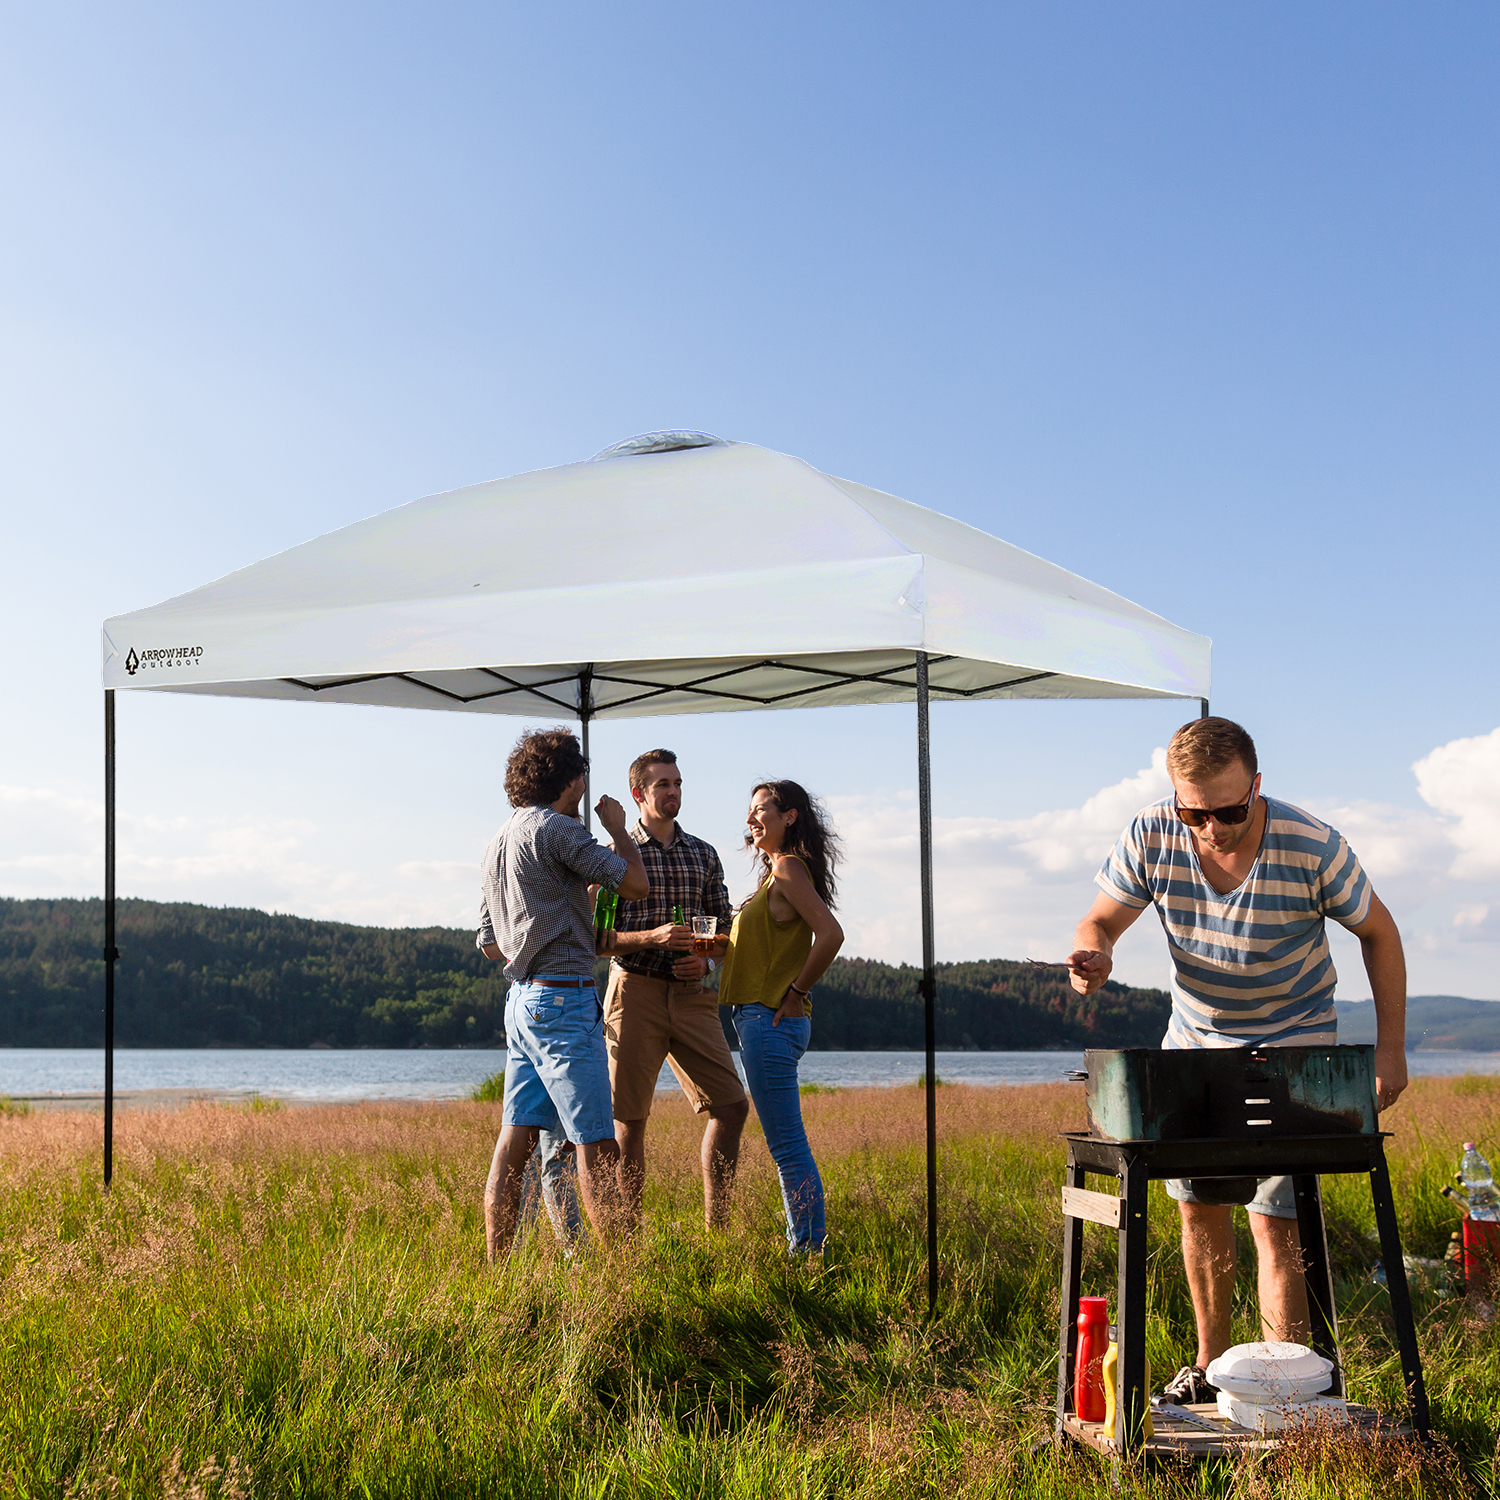 ARROWHEAD OUTDOOR 12’x12’ Pop-Up Canopy & Instant Shelter, Easy One Person Setup, Water & UV Resistant 150D Fabric Construction, Height Adjustable, Carry Bag, Guide Ropes & Stakes Included, USA-Based - image 5 of 16